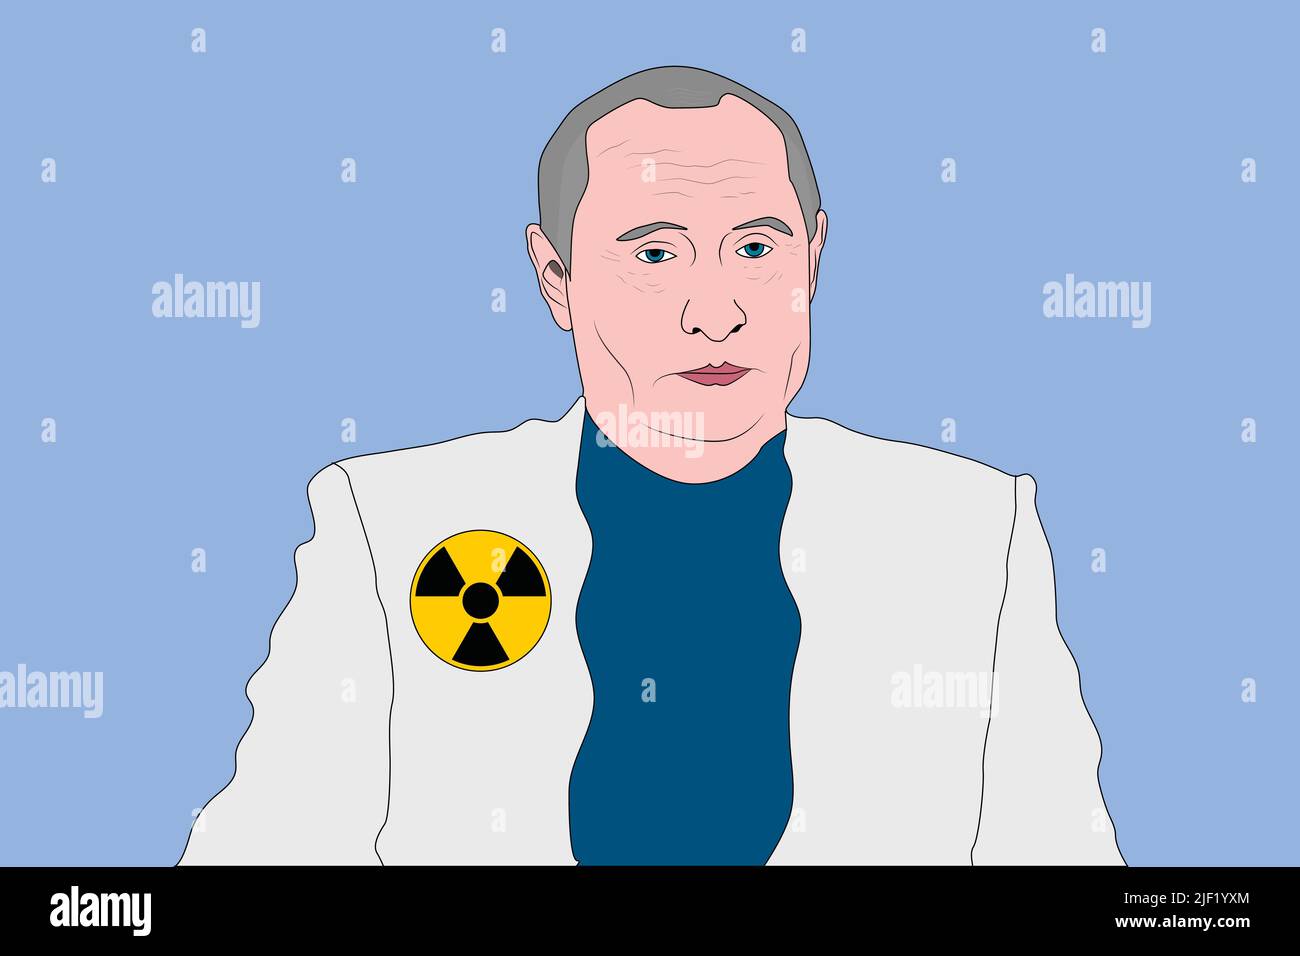 Vladimir Putin in a white suite with a nuke sign symbol - vector illustration Stock Vector